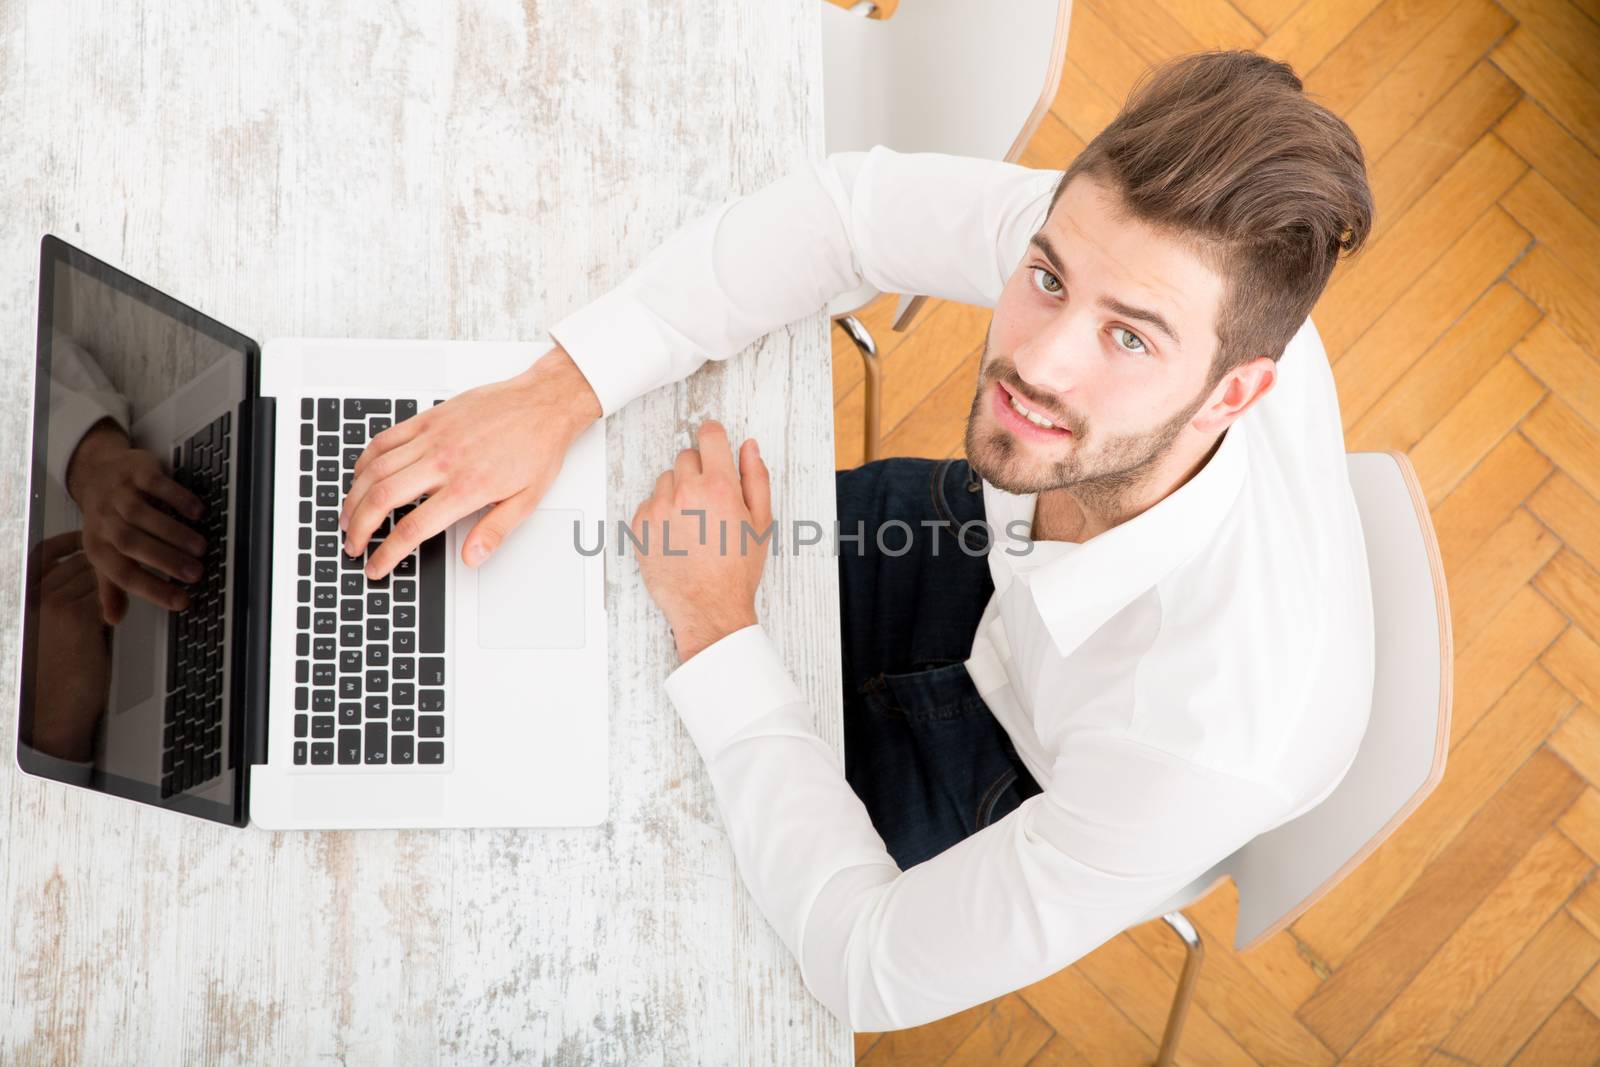 A young man sitting at the table with a laptop computer.